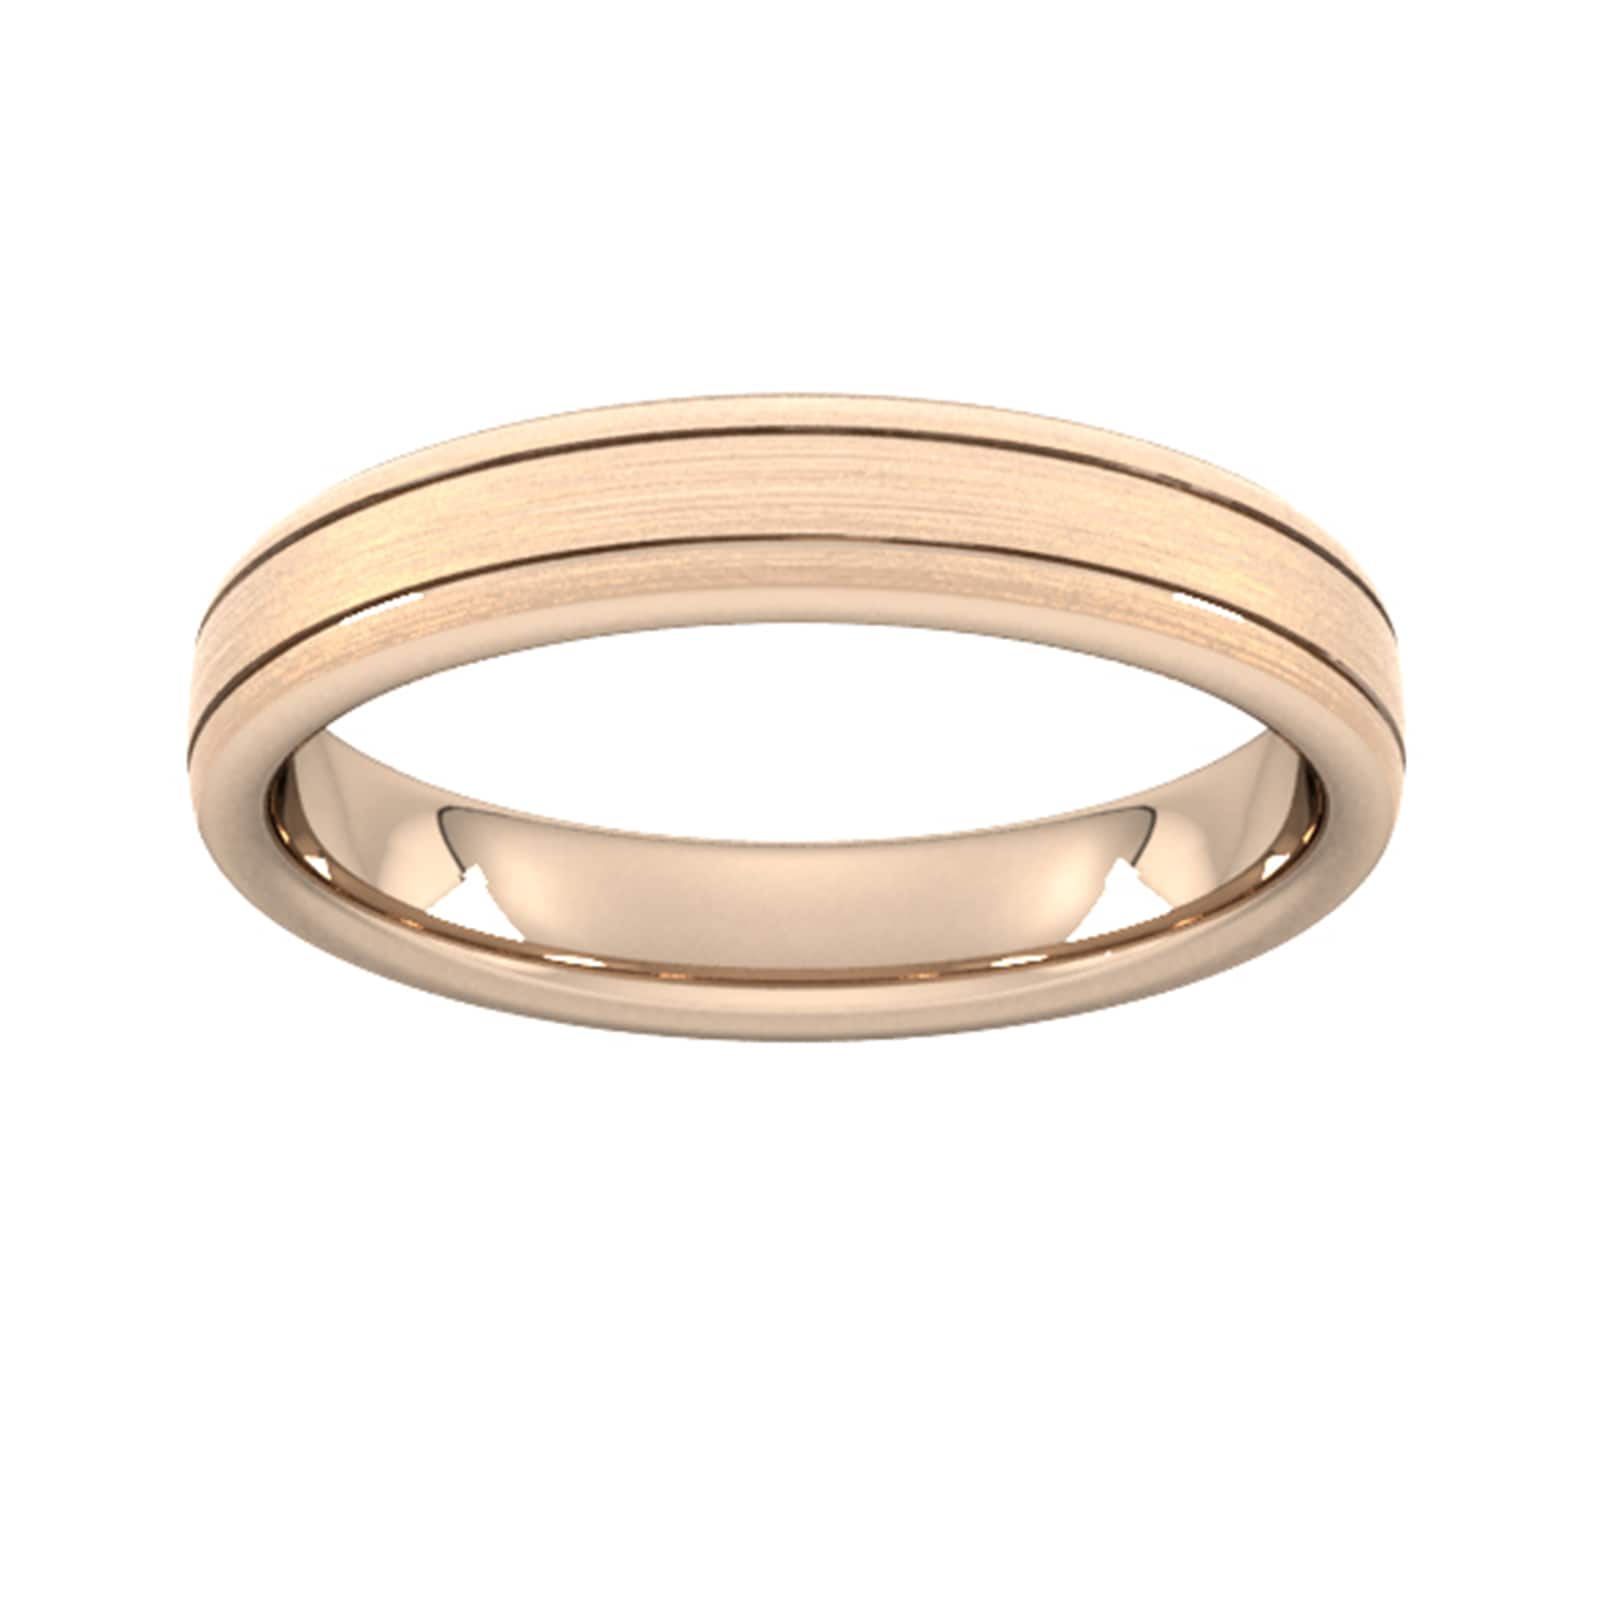 4mm Slight Court Extra Heavy Matt Finish With Double Grooves Wedding Ring In 9 Carat Rose Gold - Ring Size M